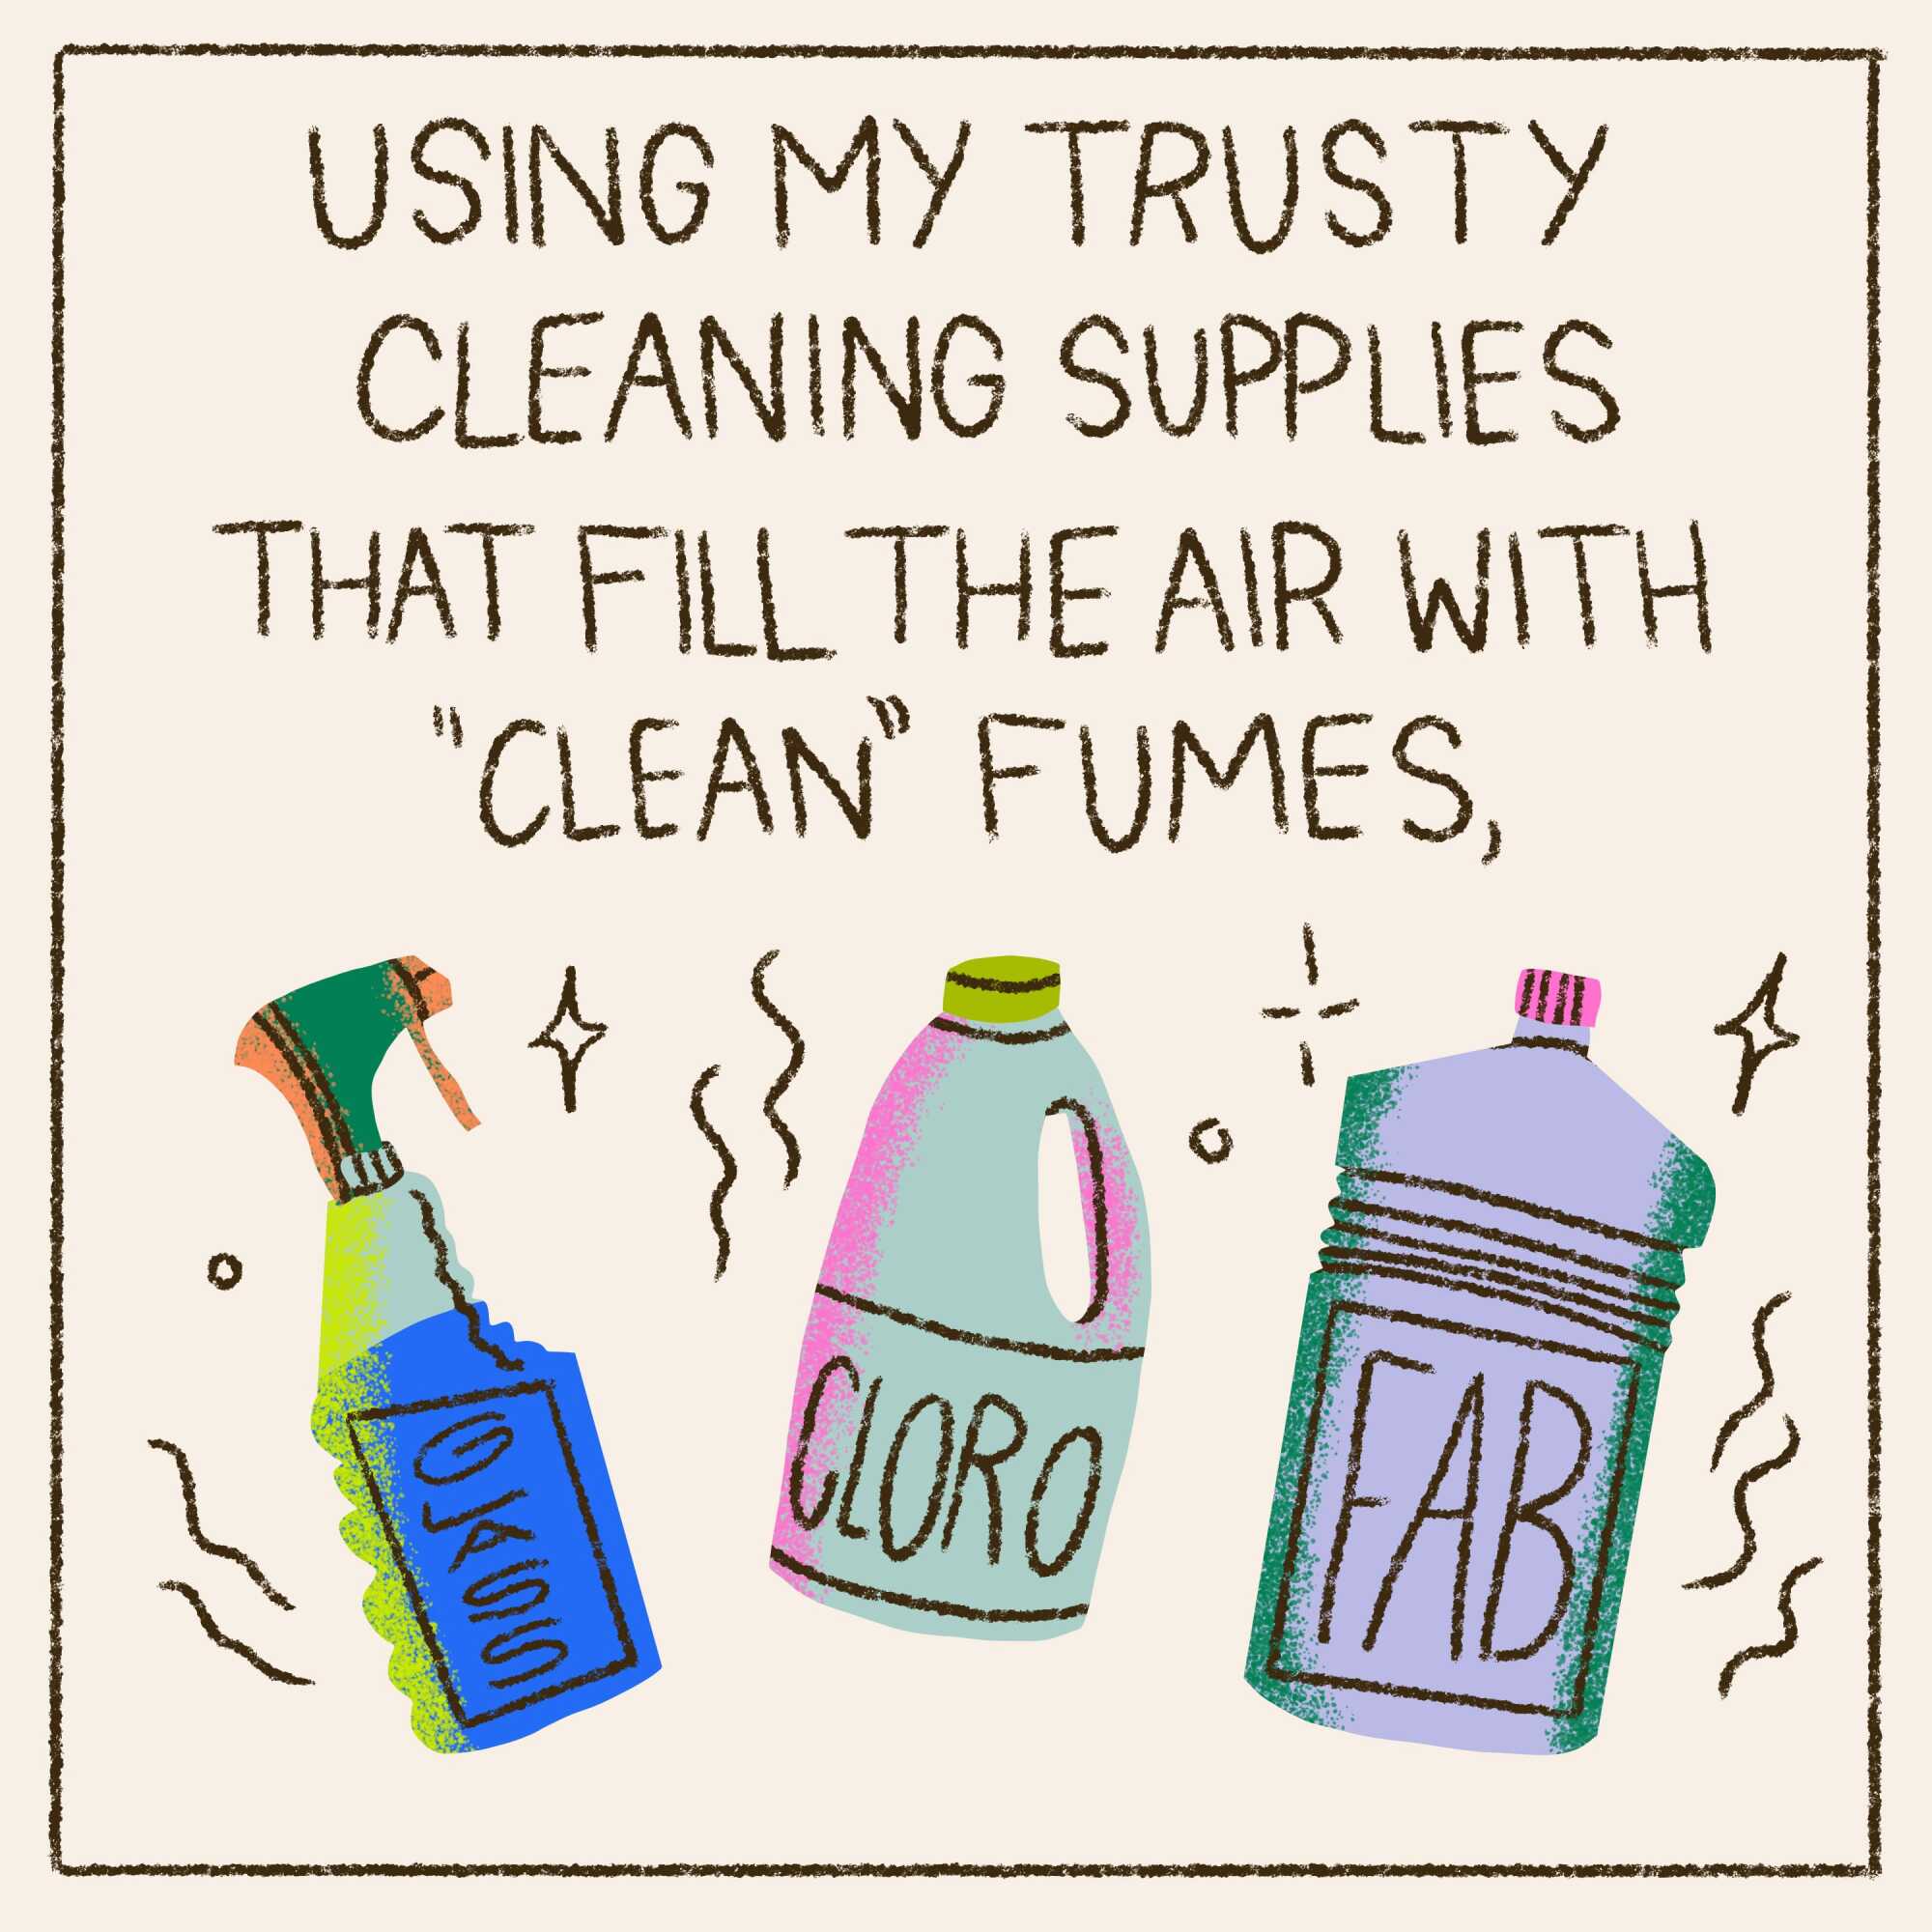 Using my trusty cleaning supplies that fill the air with "clean" fumes